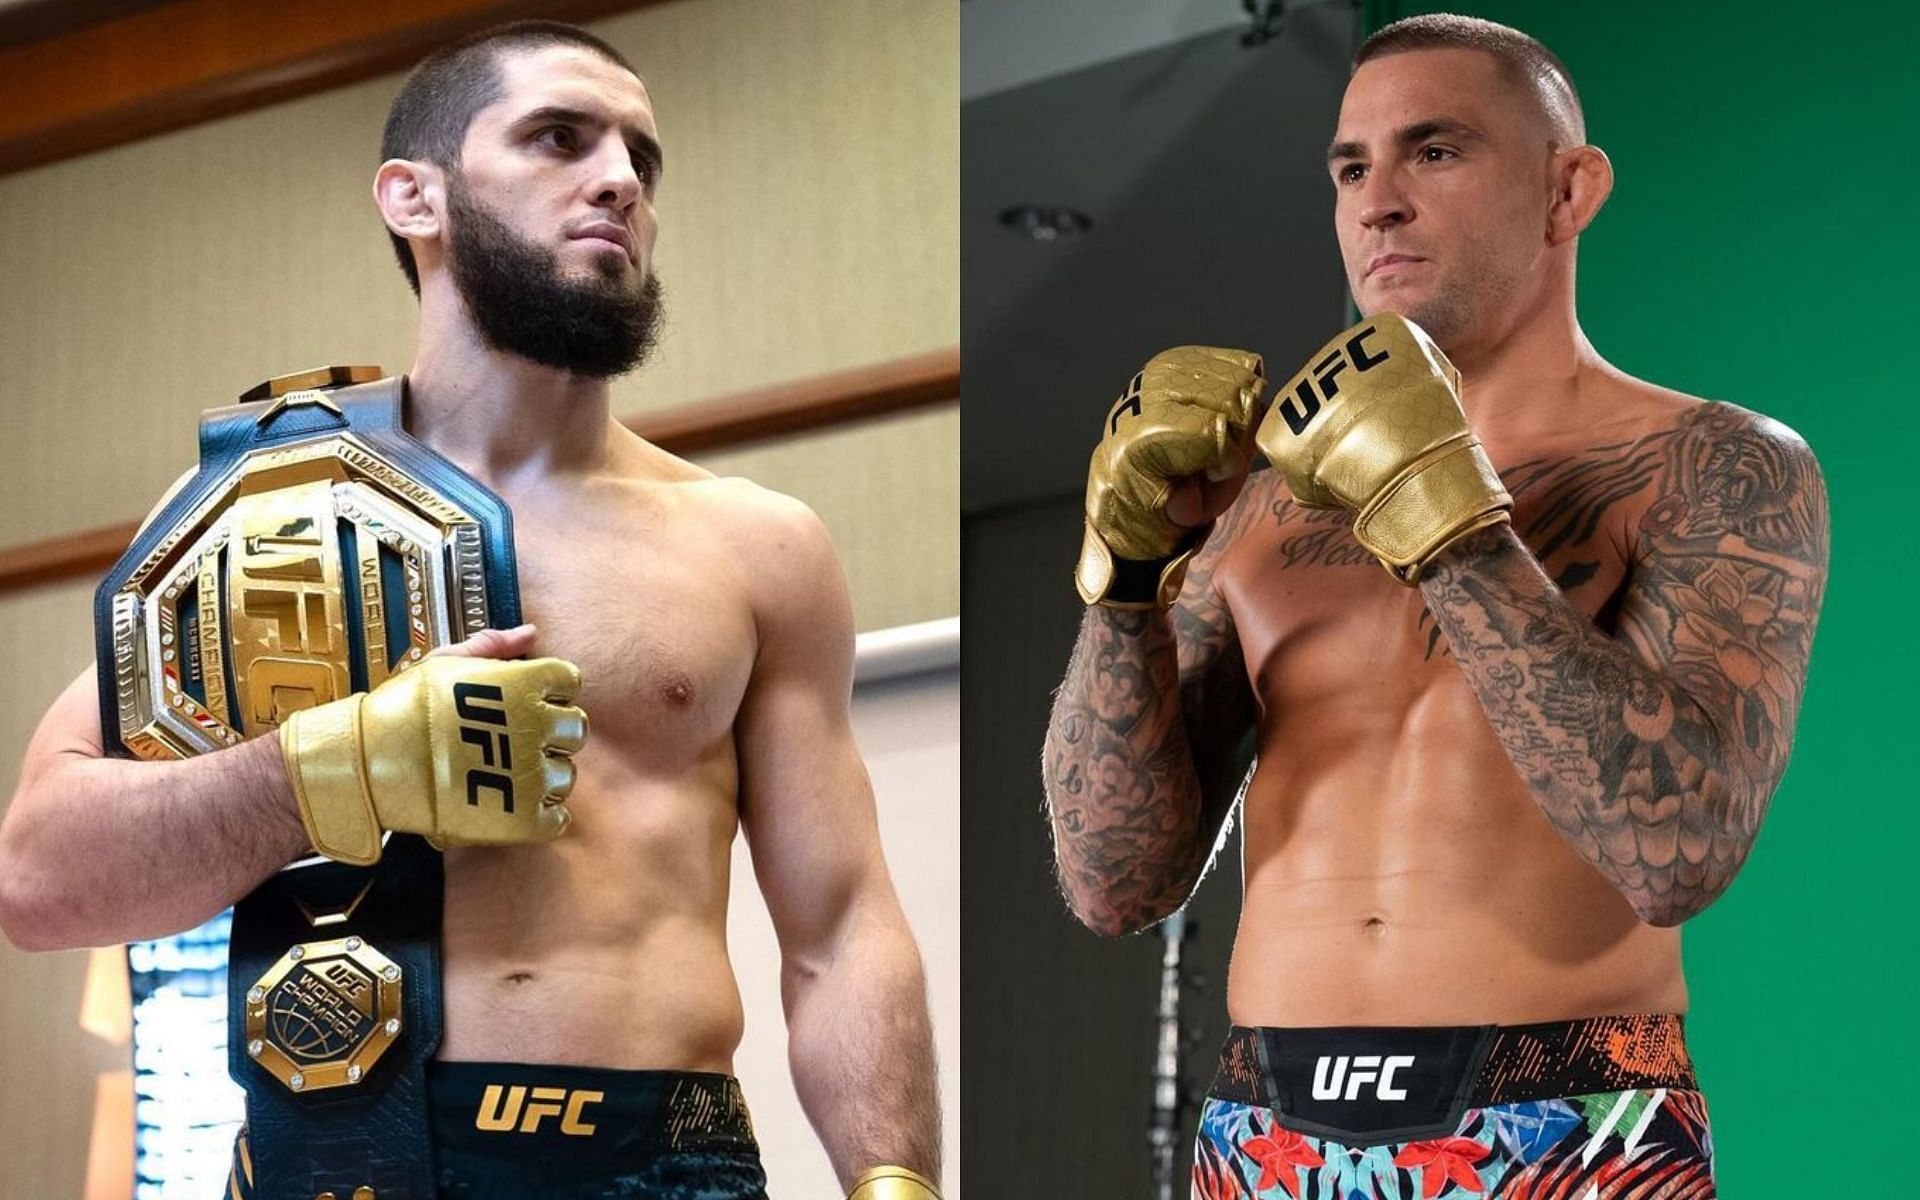 Islam Makhachev (left) puts his lightweight title on the line against Dustin Poirier (right) at UFC 302 [Images courtesy @ufc on Instagram]